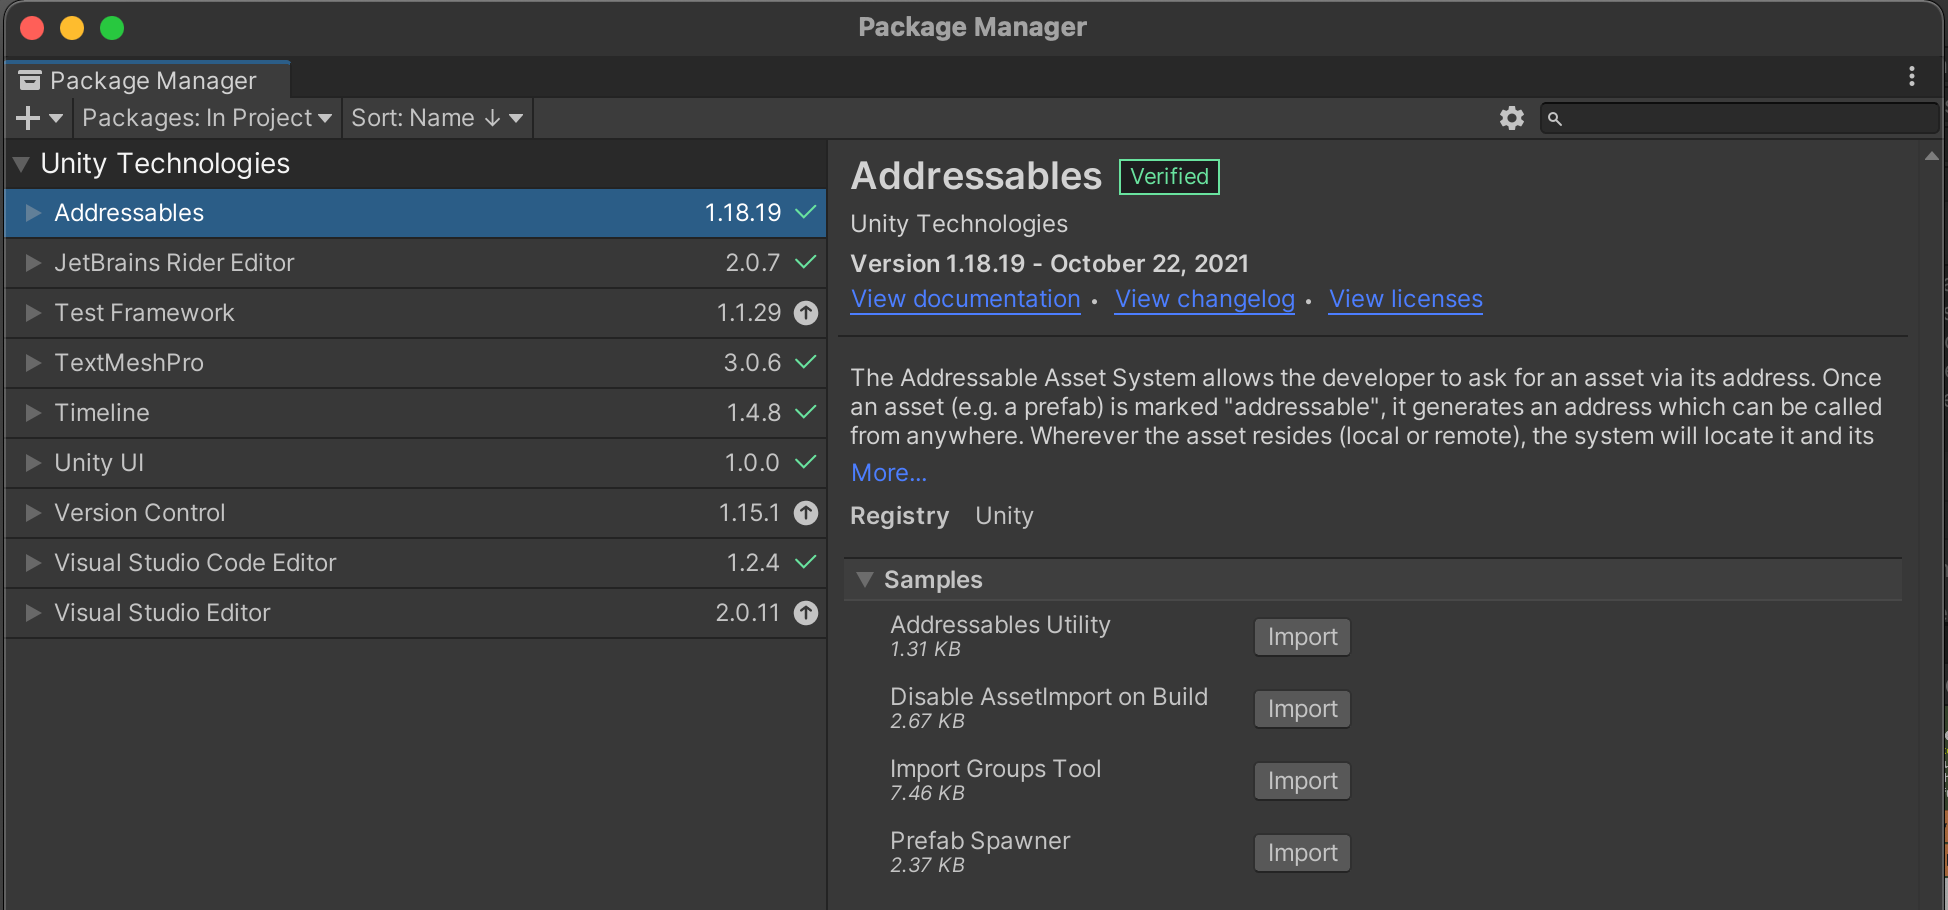 Publish Asset Store UPM package on which LTS version?